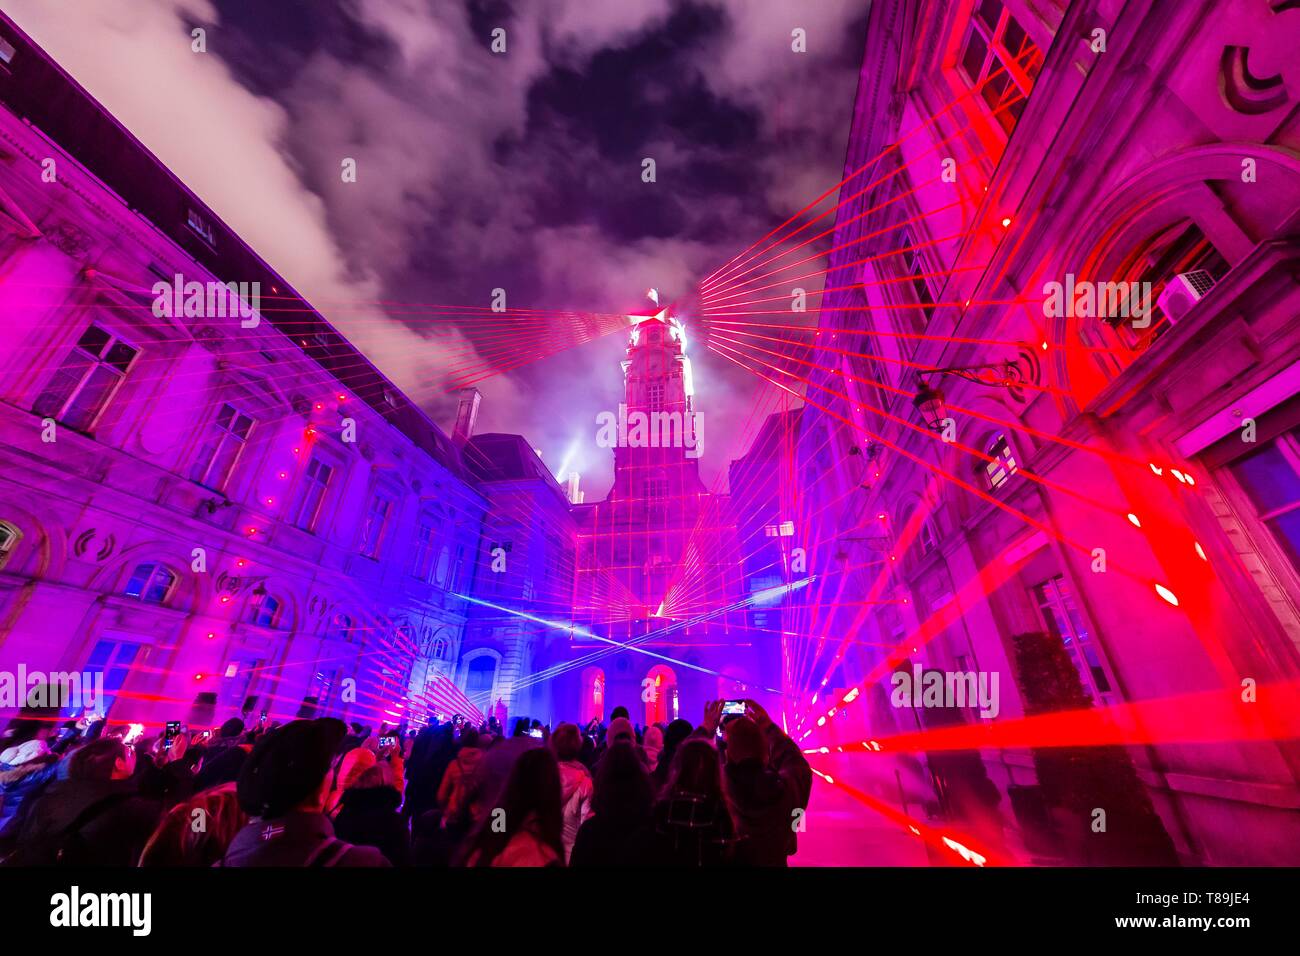 France, Rhone, Lyon, district of Vieux-Lyon, historical site listed as World Heritage by UNESCO, the courtyard of the Town Hall during the Fete des Lumieres (Light Festival), show Tricolor of Ralf Lotting Stock Photo